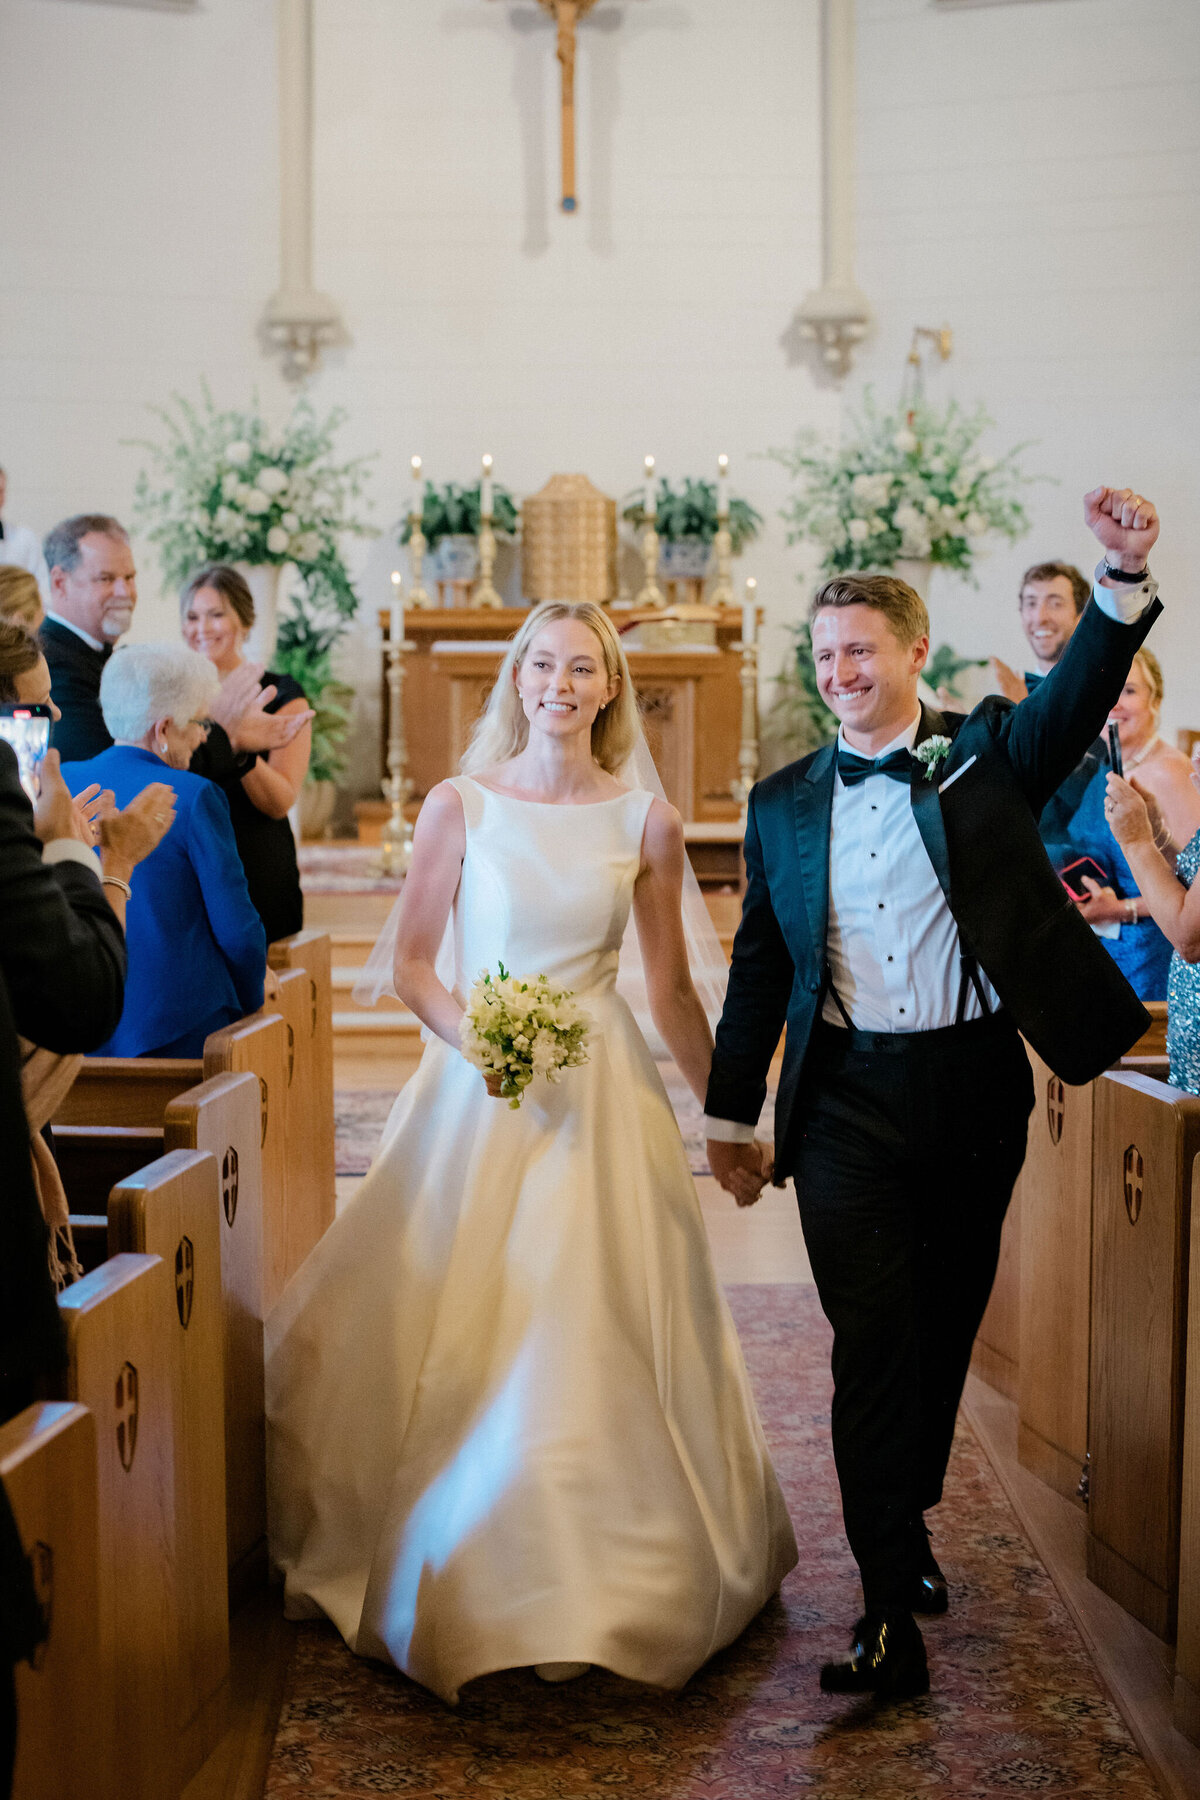 just-married-at-st-patrick-church-mystic-jen-strunk-events